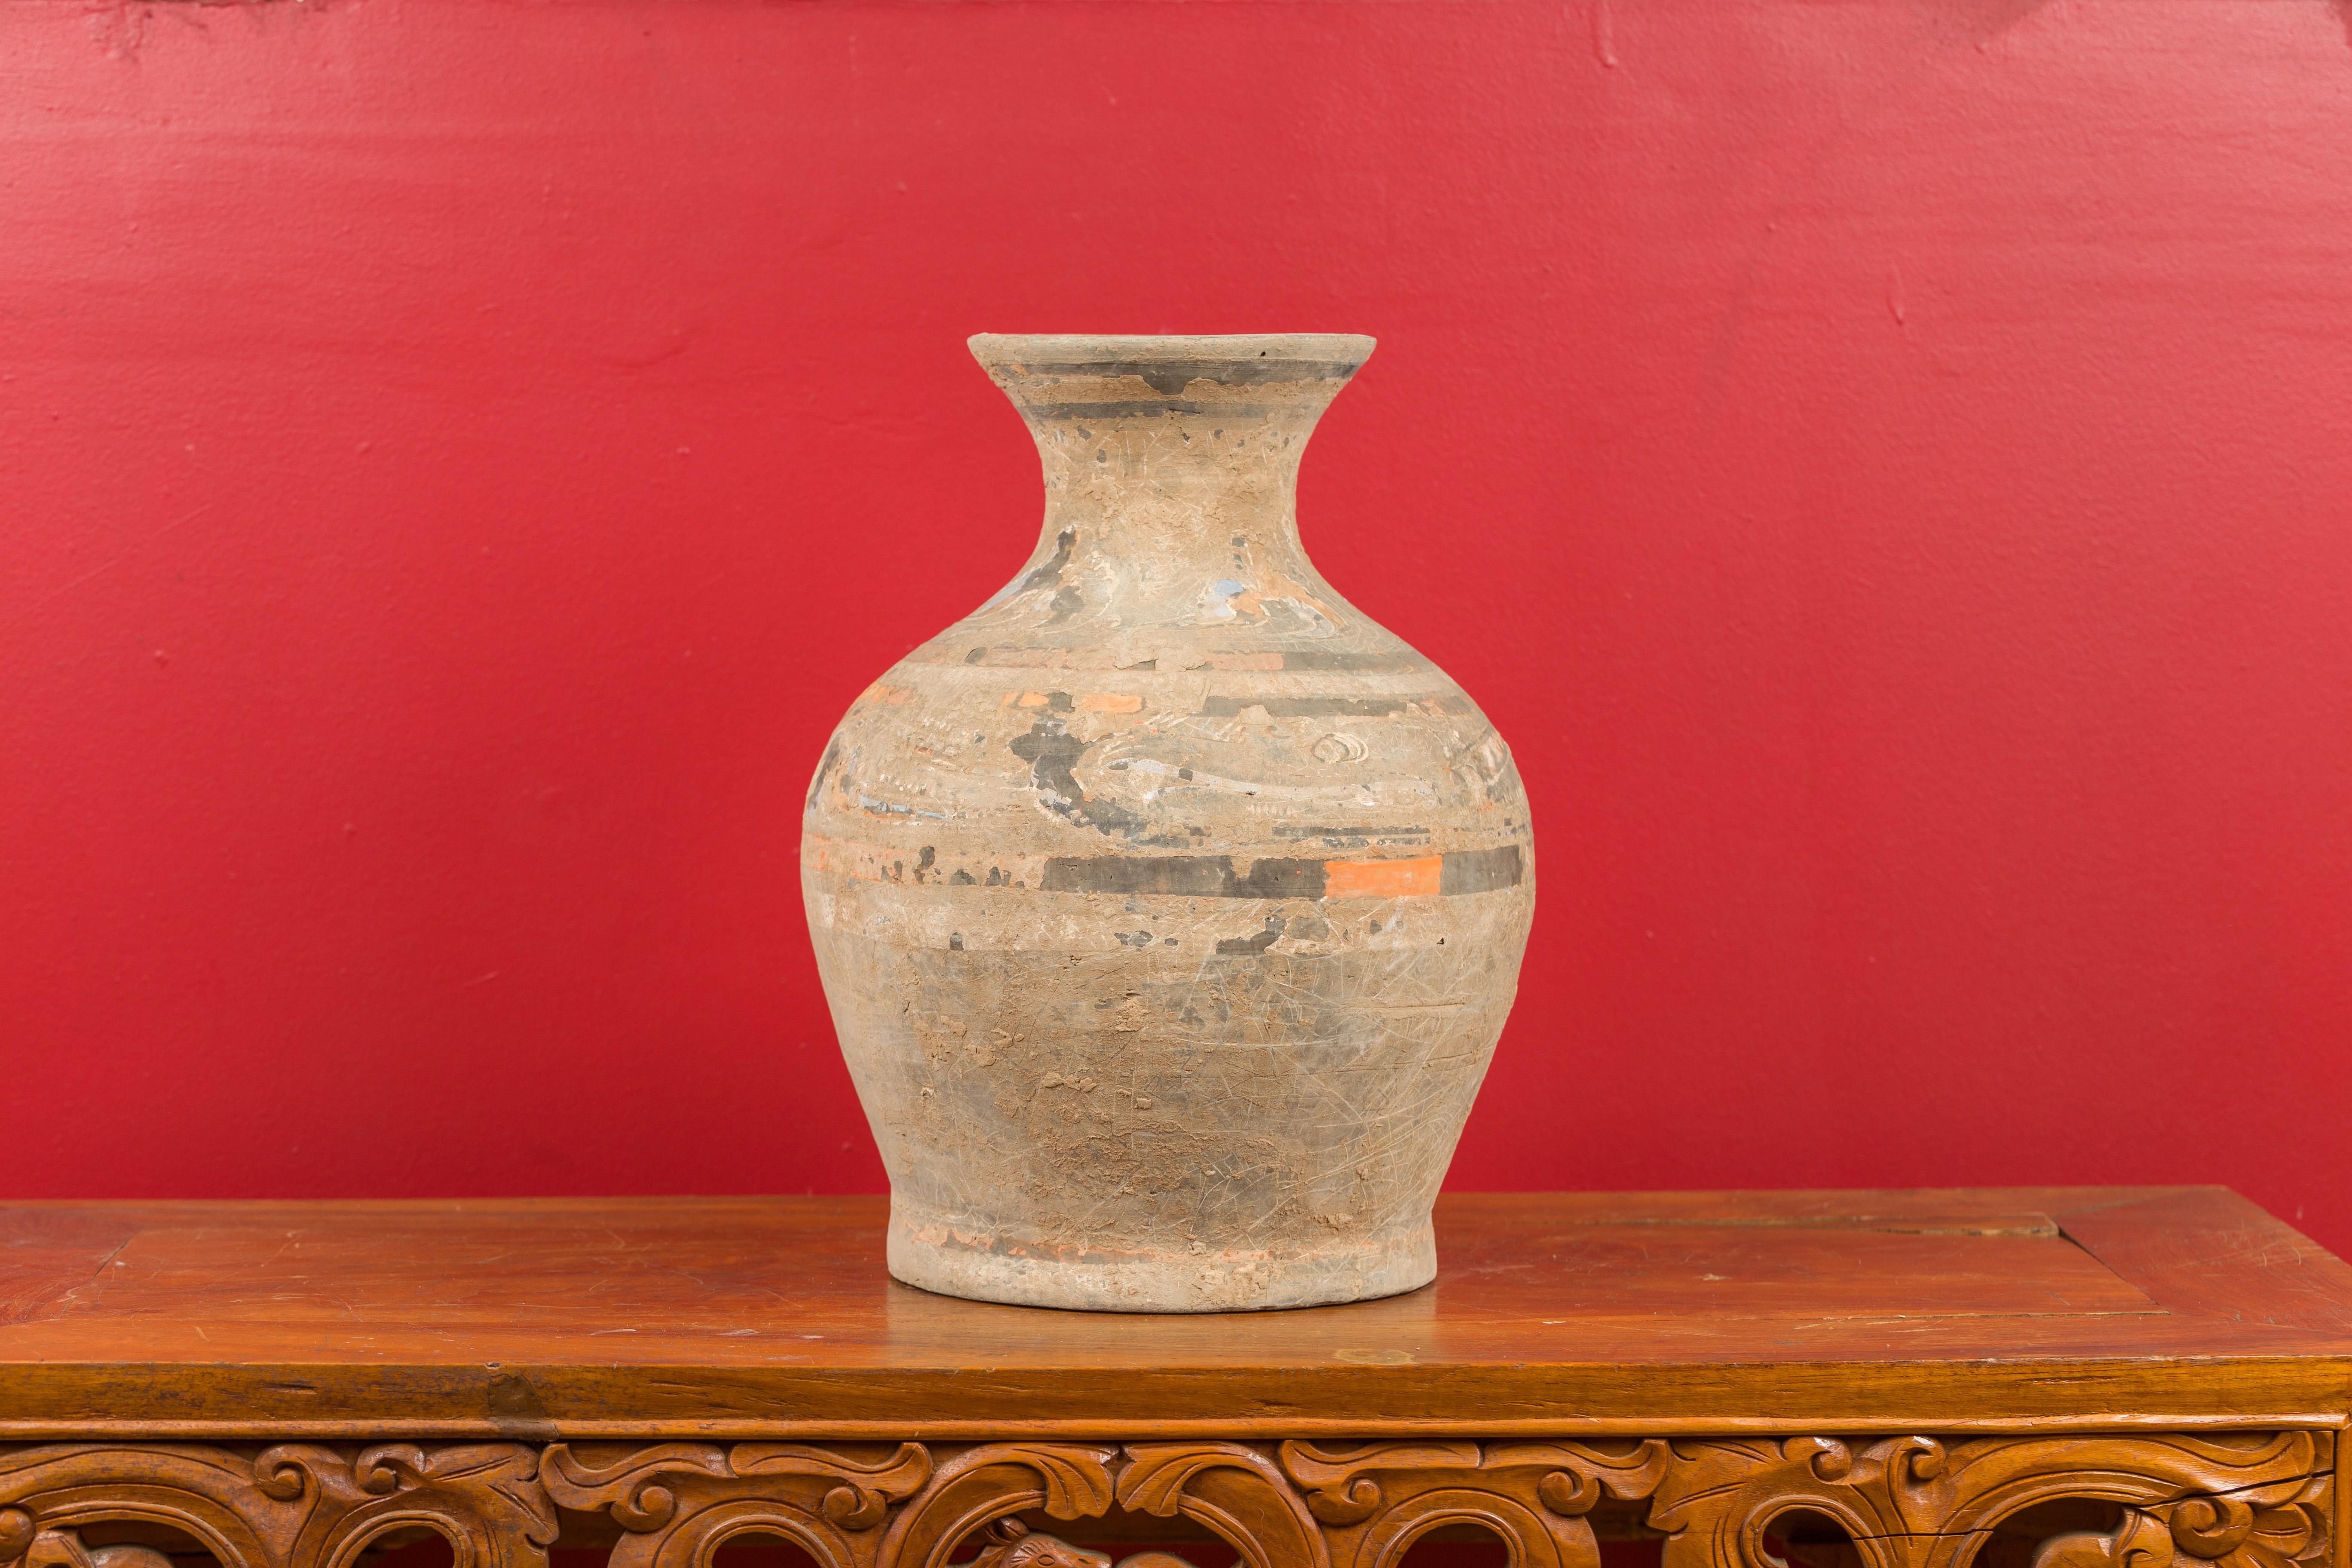 Chinese Han Dynasty Terracotta Hu Vessel with Original Paint circa 202 BC-200 AD 8